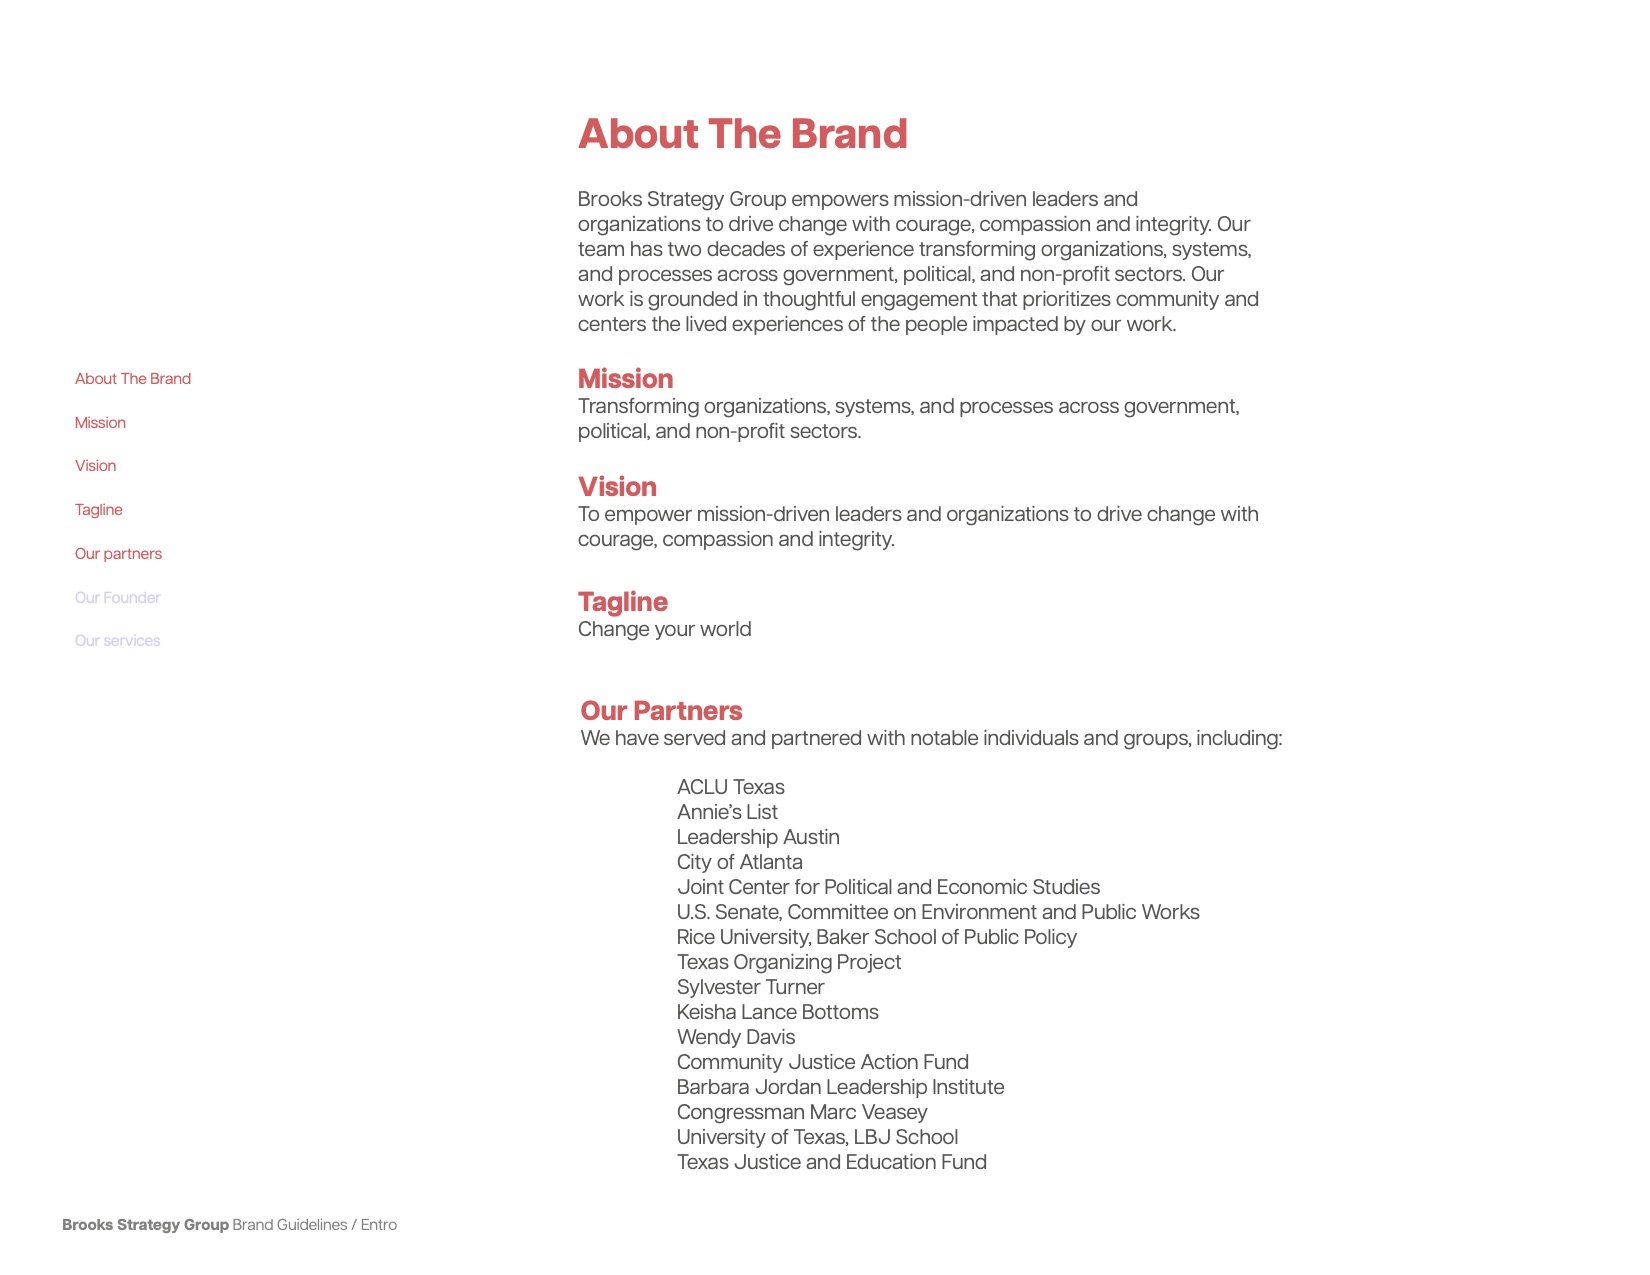 Brooks-brand-guidelines-Final Review page 2.jpg